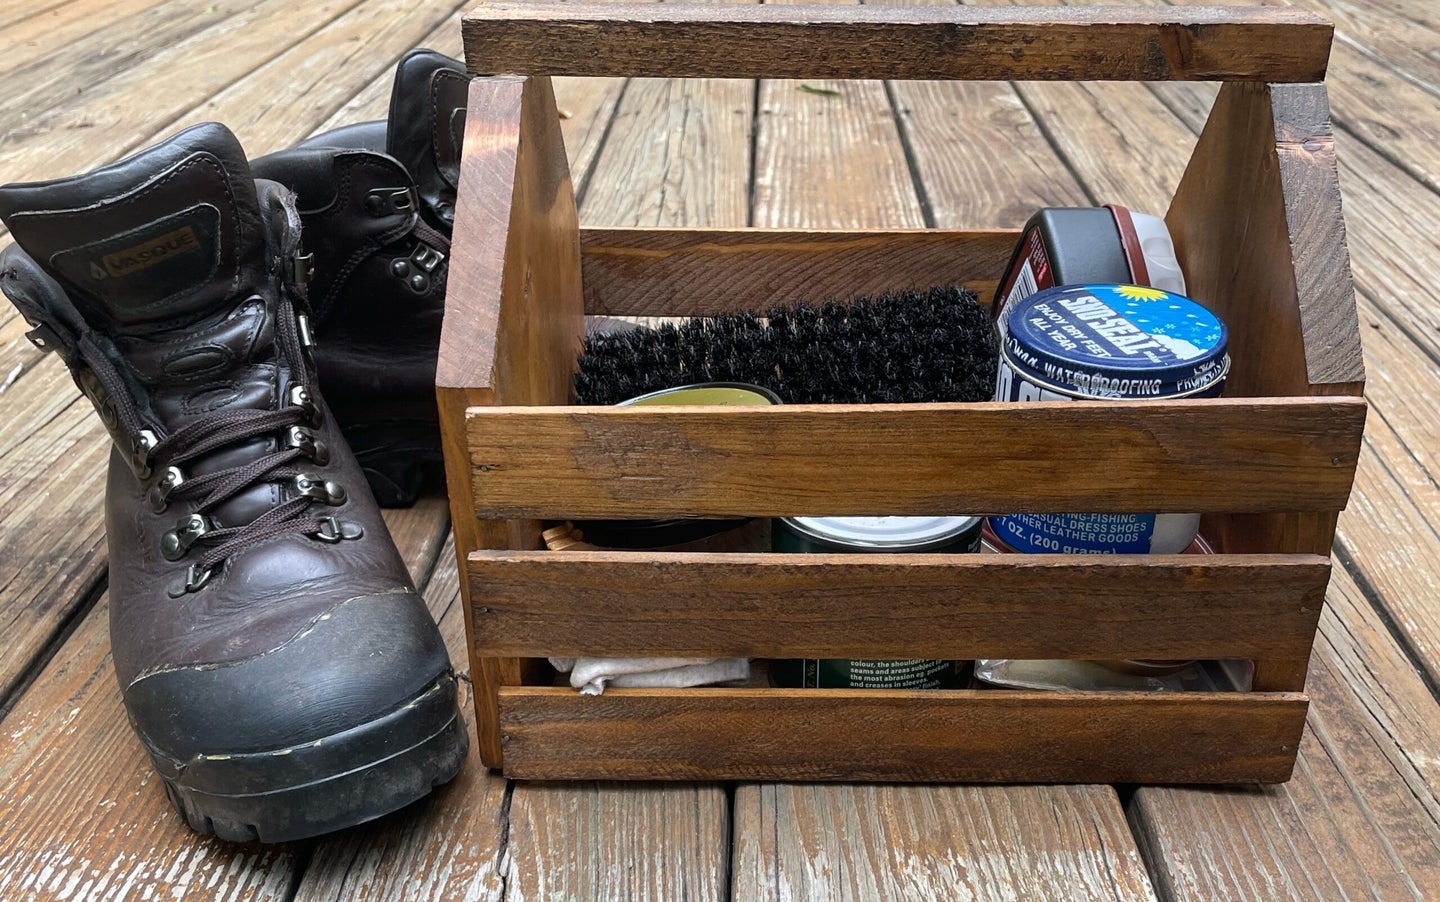 A pair of Vasque boots next to a boot cleaning kit